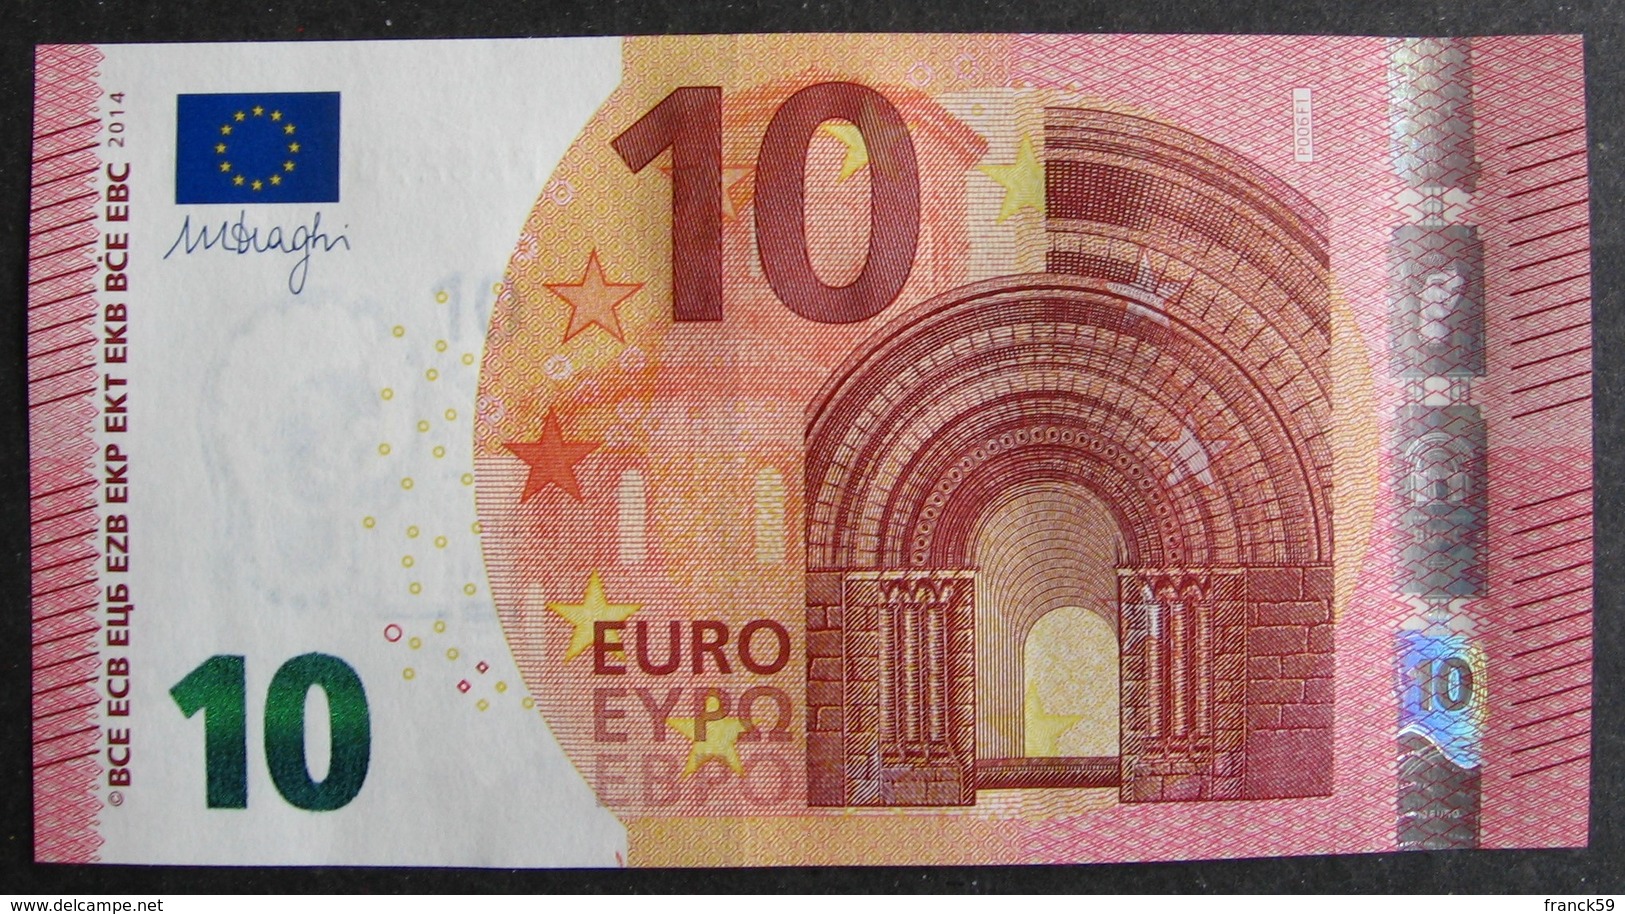 10 Euro Pays-Bas "PA" 2014 Draghi P006F1 LUXE / UNC - 10 Euro